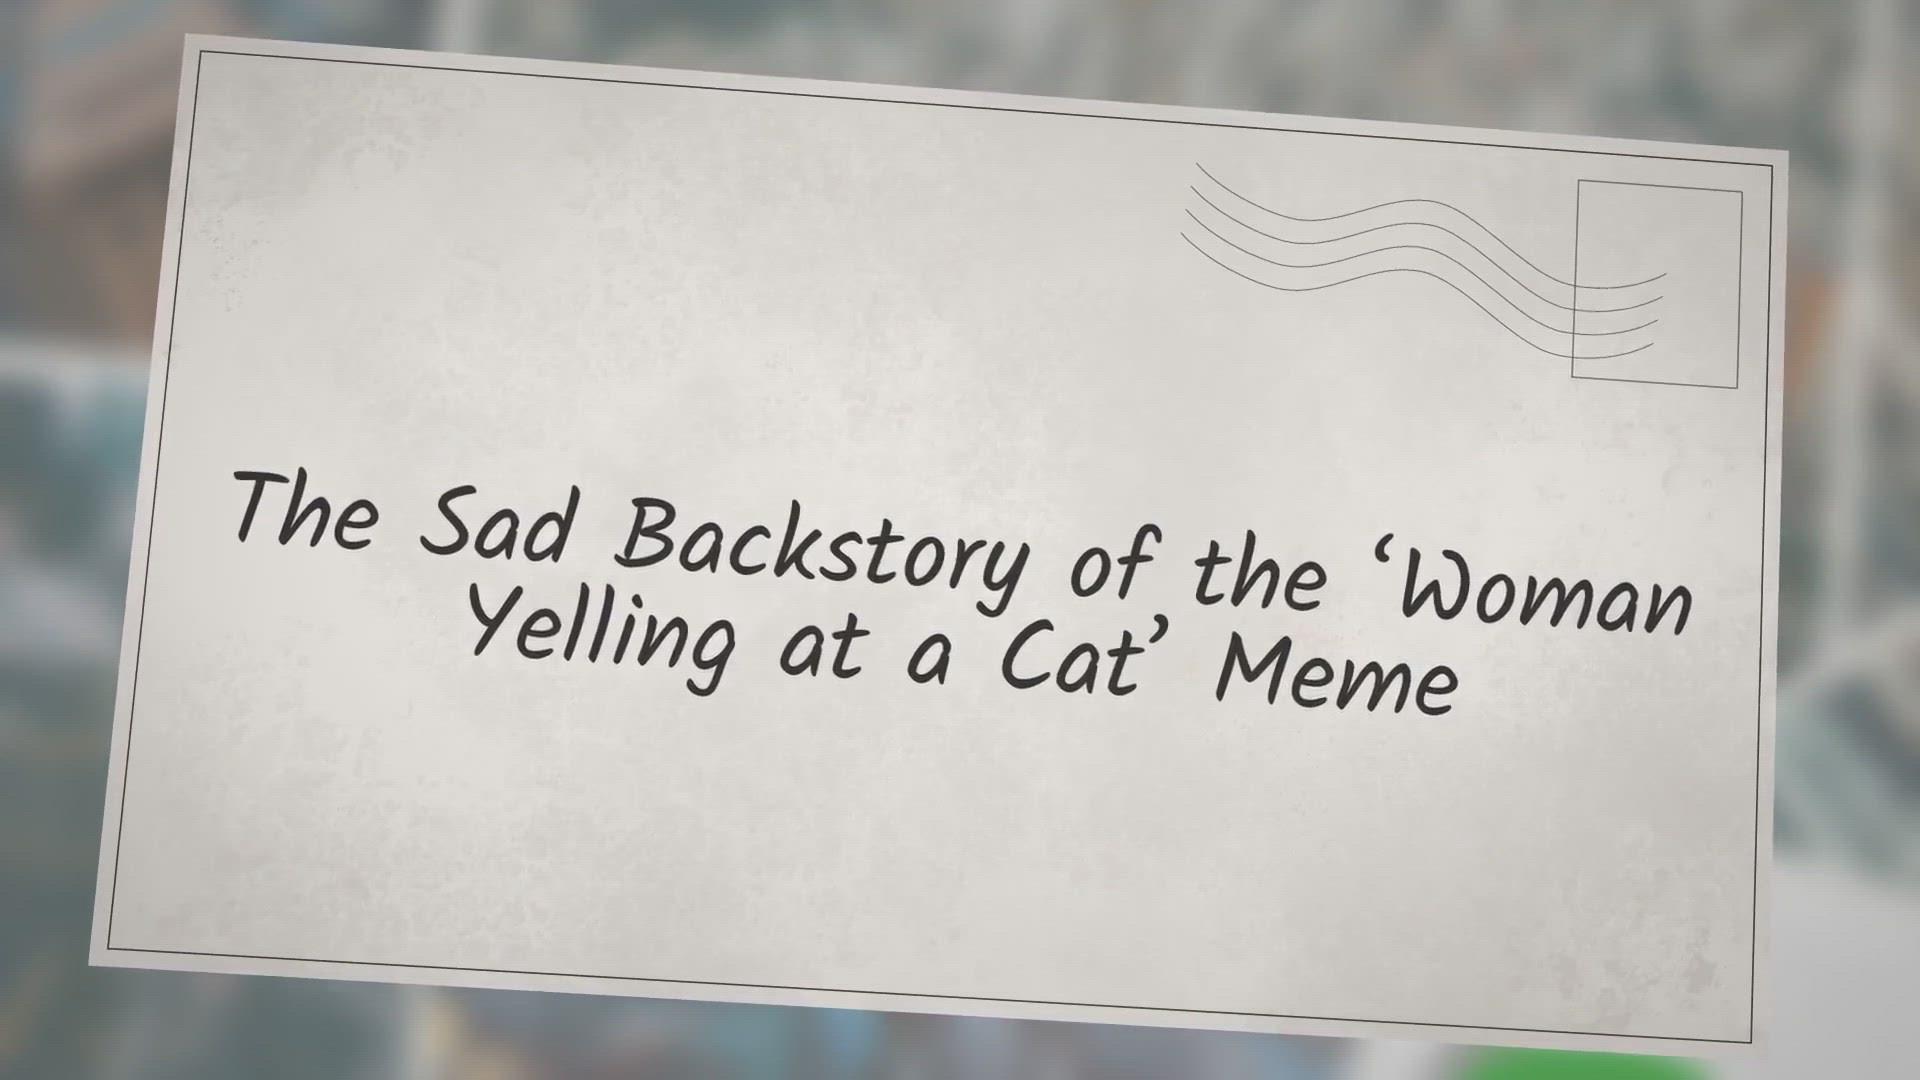 'Video thumbnail for The Sad Backstory of the ‘Woman Yelling at a Cat’ Meme'